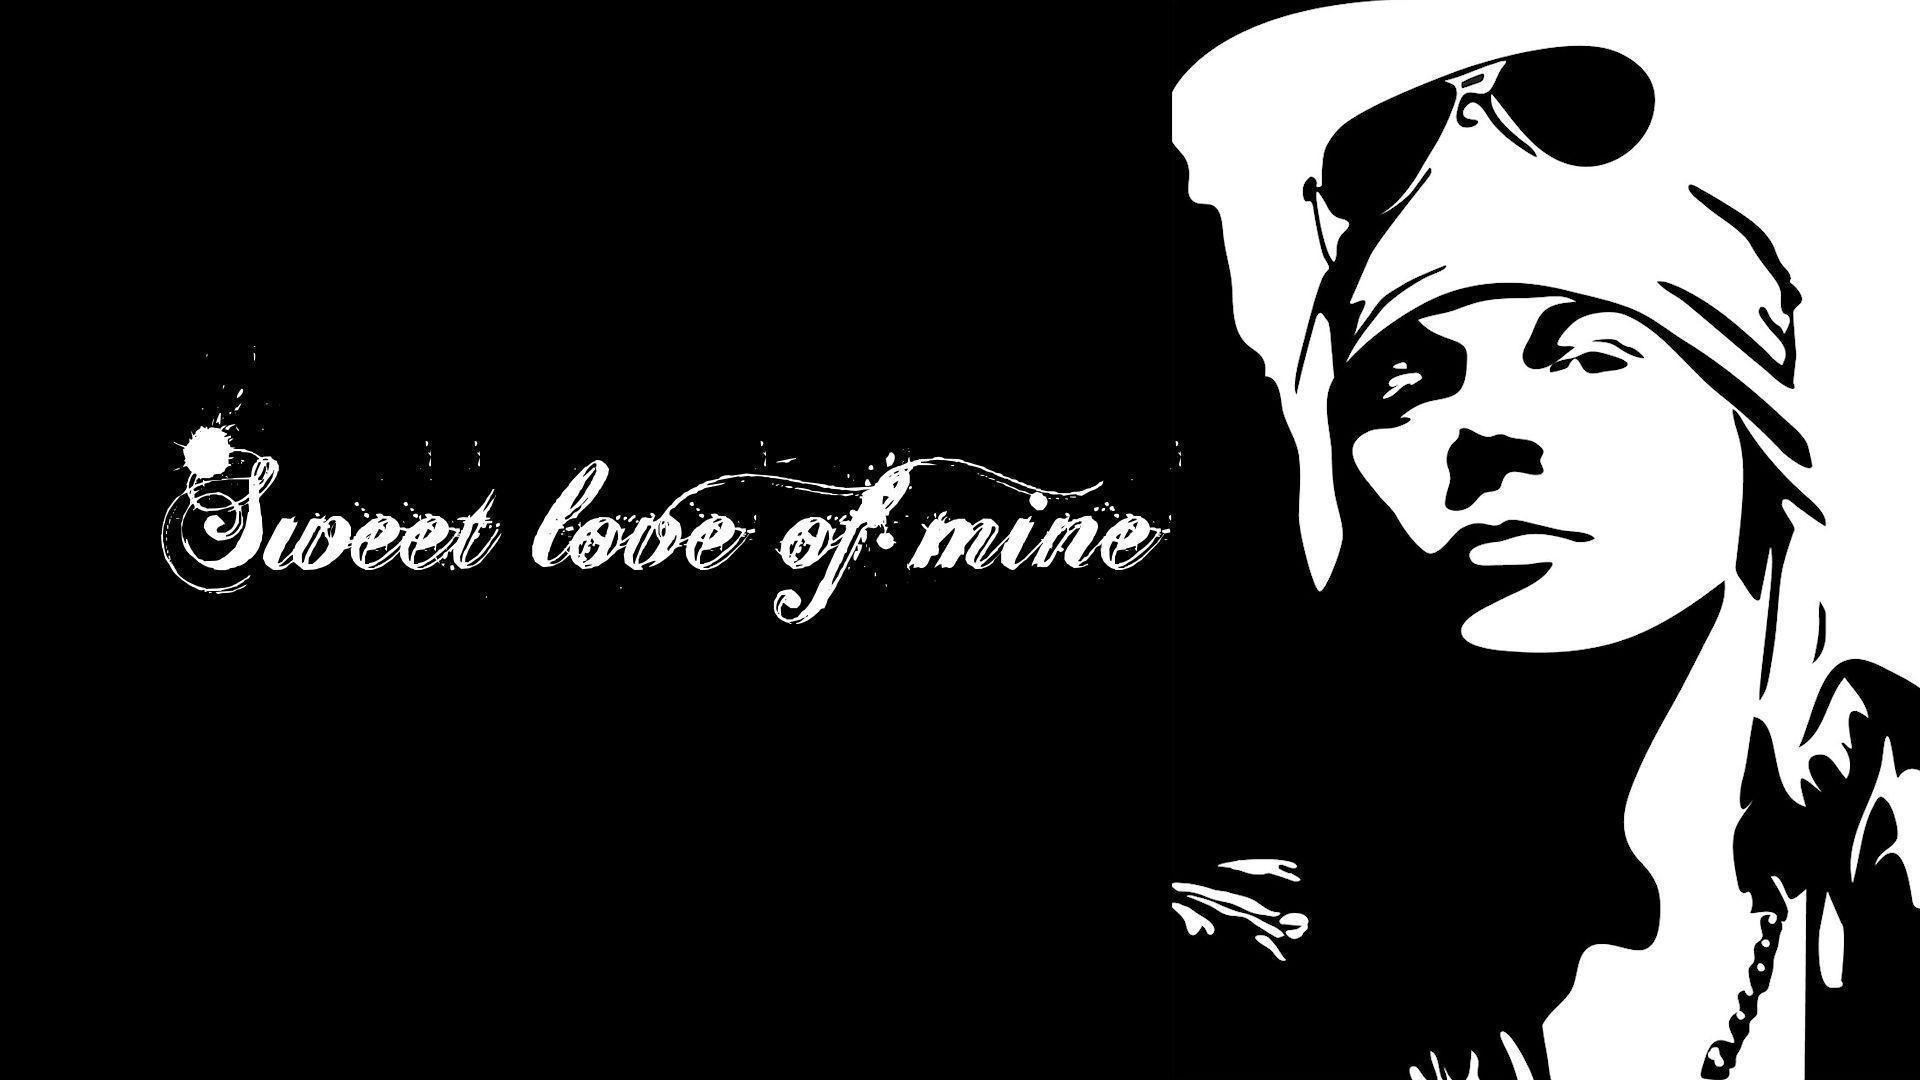 Axl Rose Wallpapers, Collection, Axl Rose Backgrounds, 1920x1080 Full HD Desktop